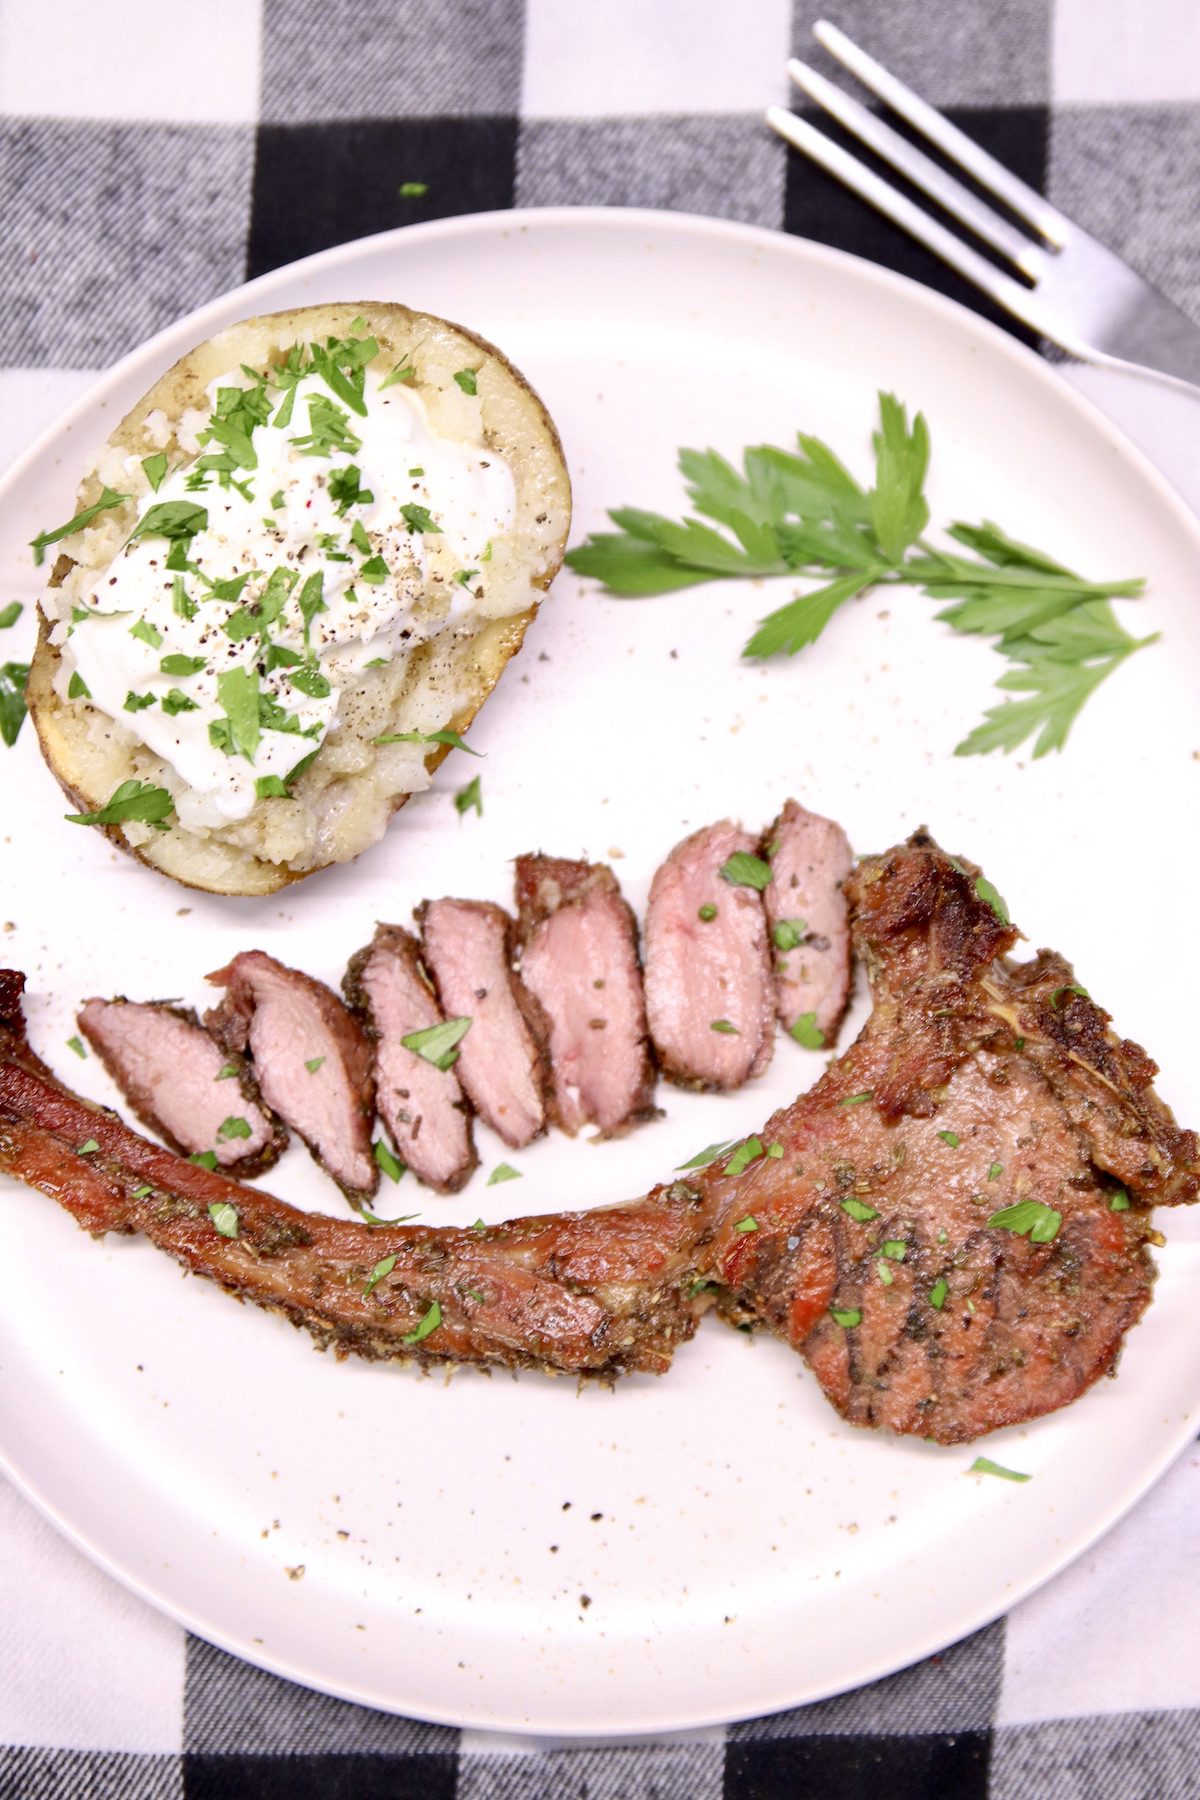 Grilled Venison chop on a plate with baked potato